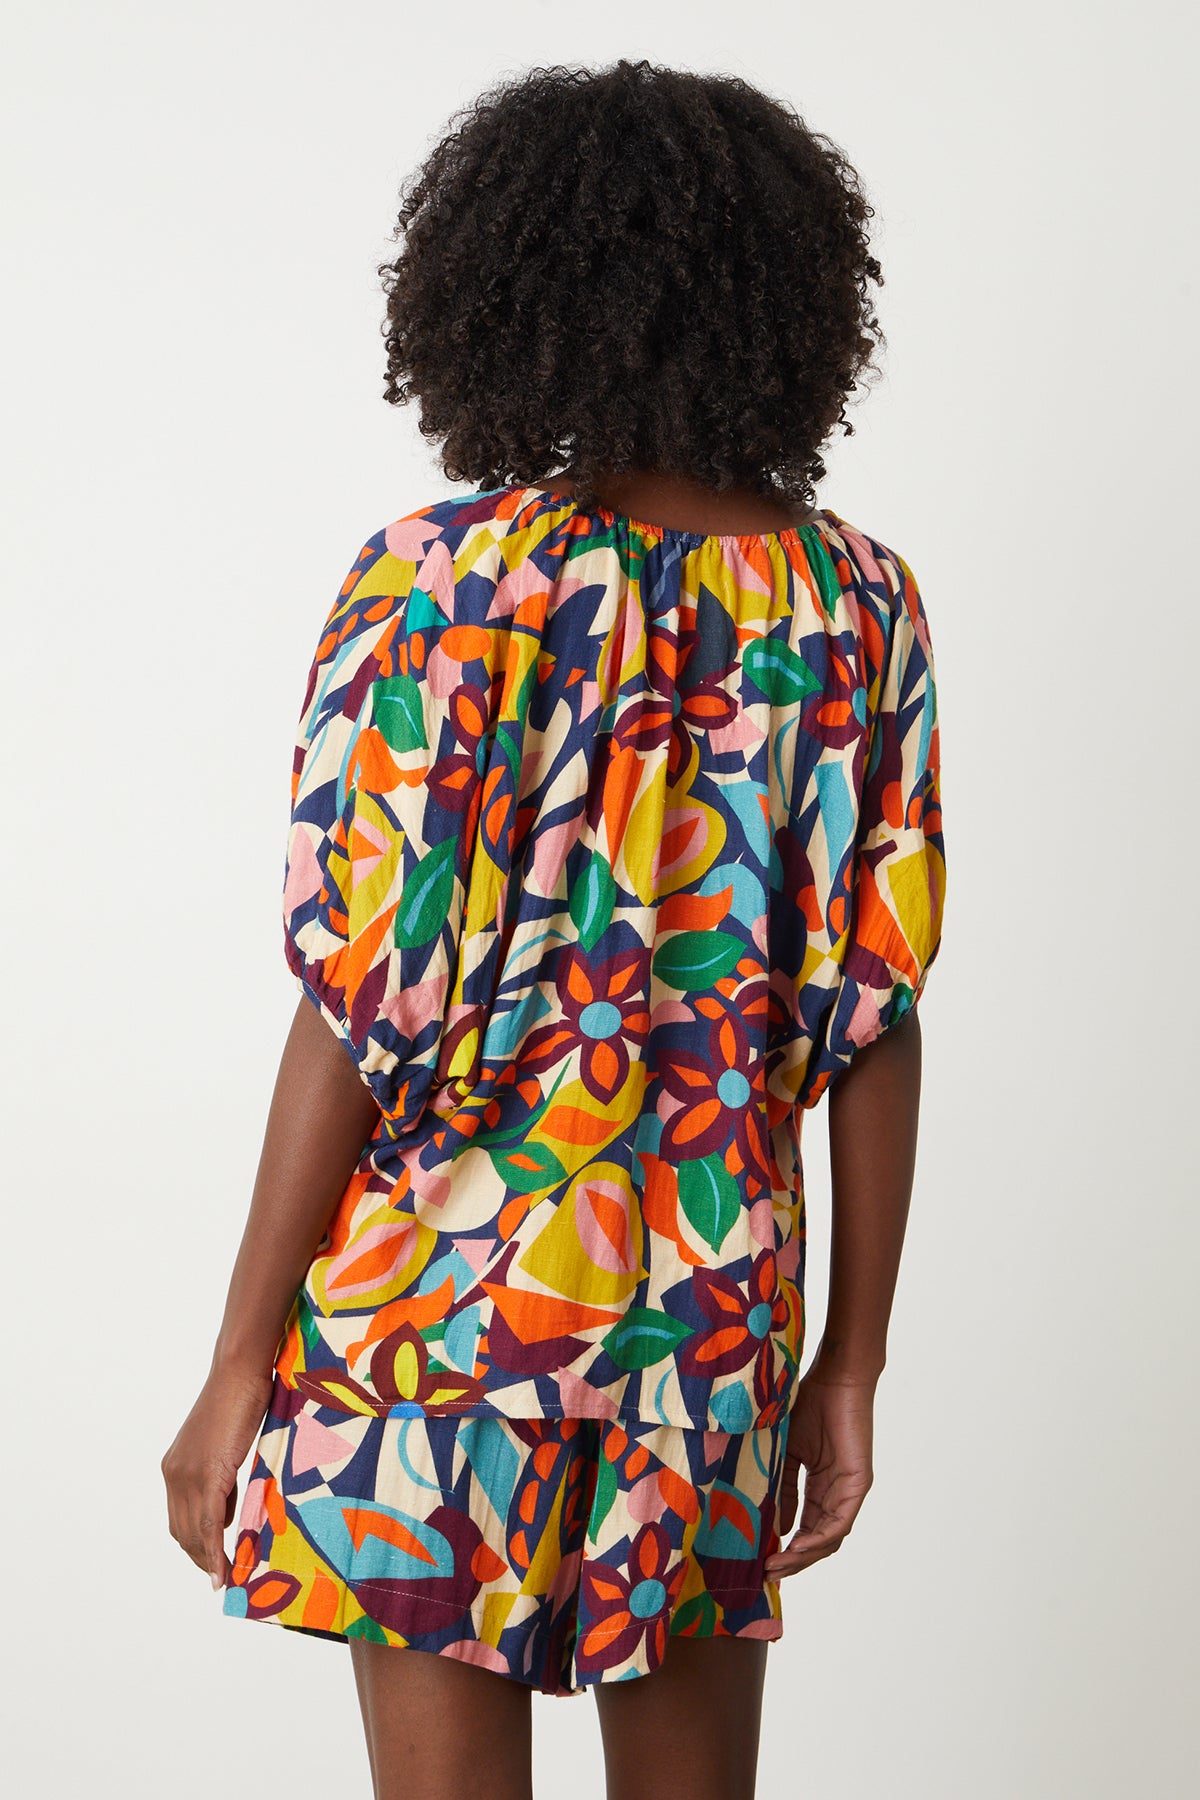   The back view of a woman wearing a Velvet by Graham & Spencer ROBIN PRINTED LINEN TOP and Josie shorts 